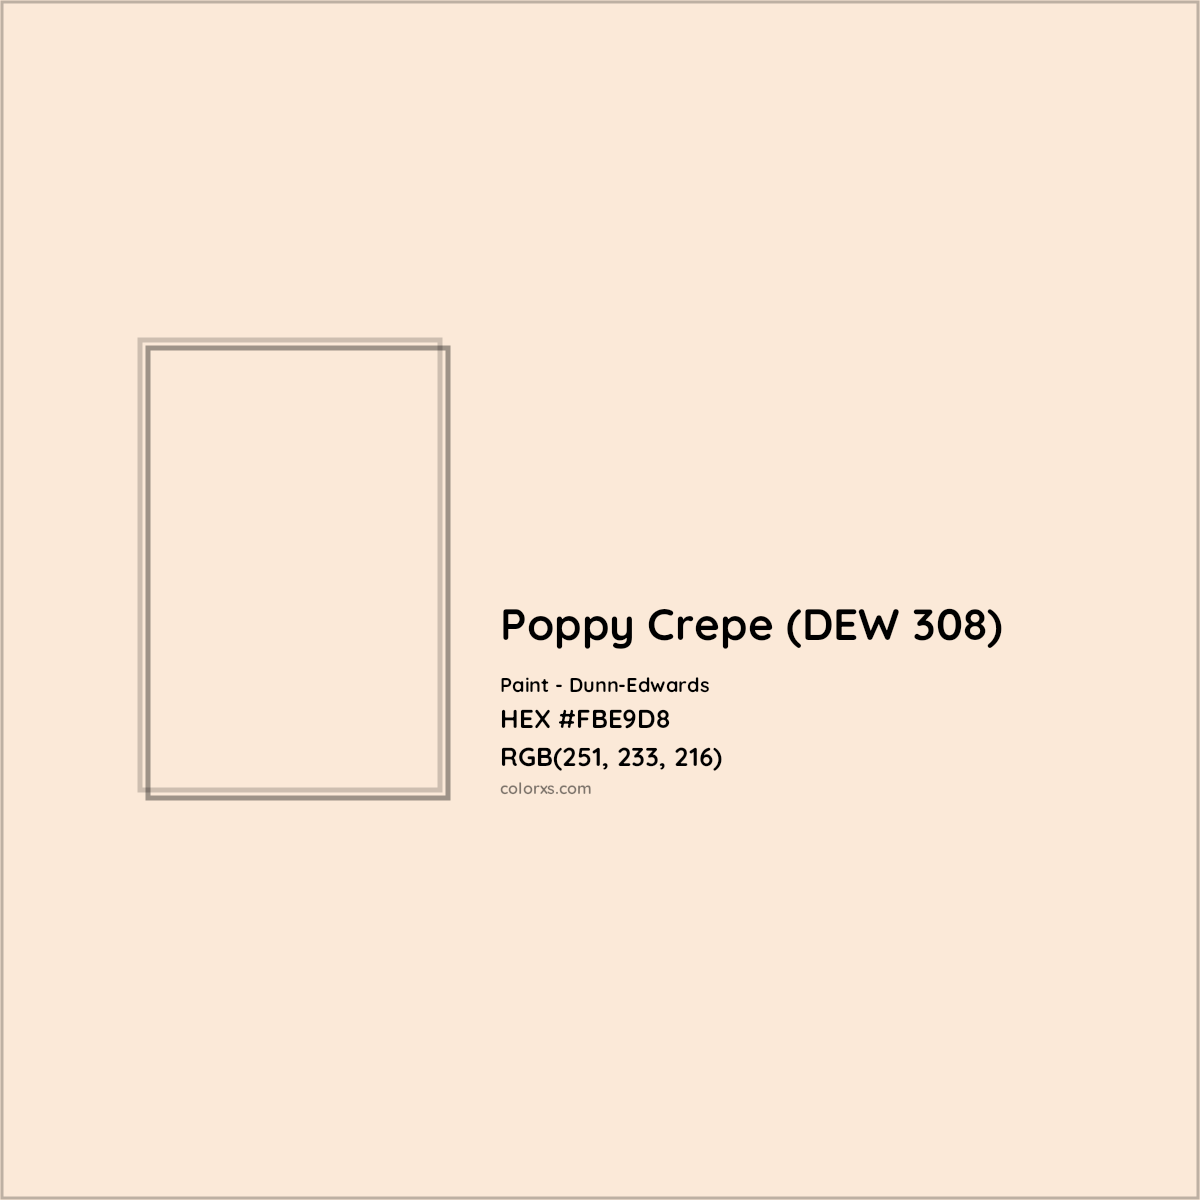 HEX #FBE9D8 Poppy Crepe (DEW 308) Paint Dunn-Edwards - Color Code